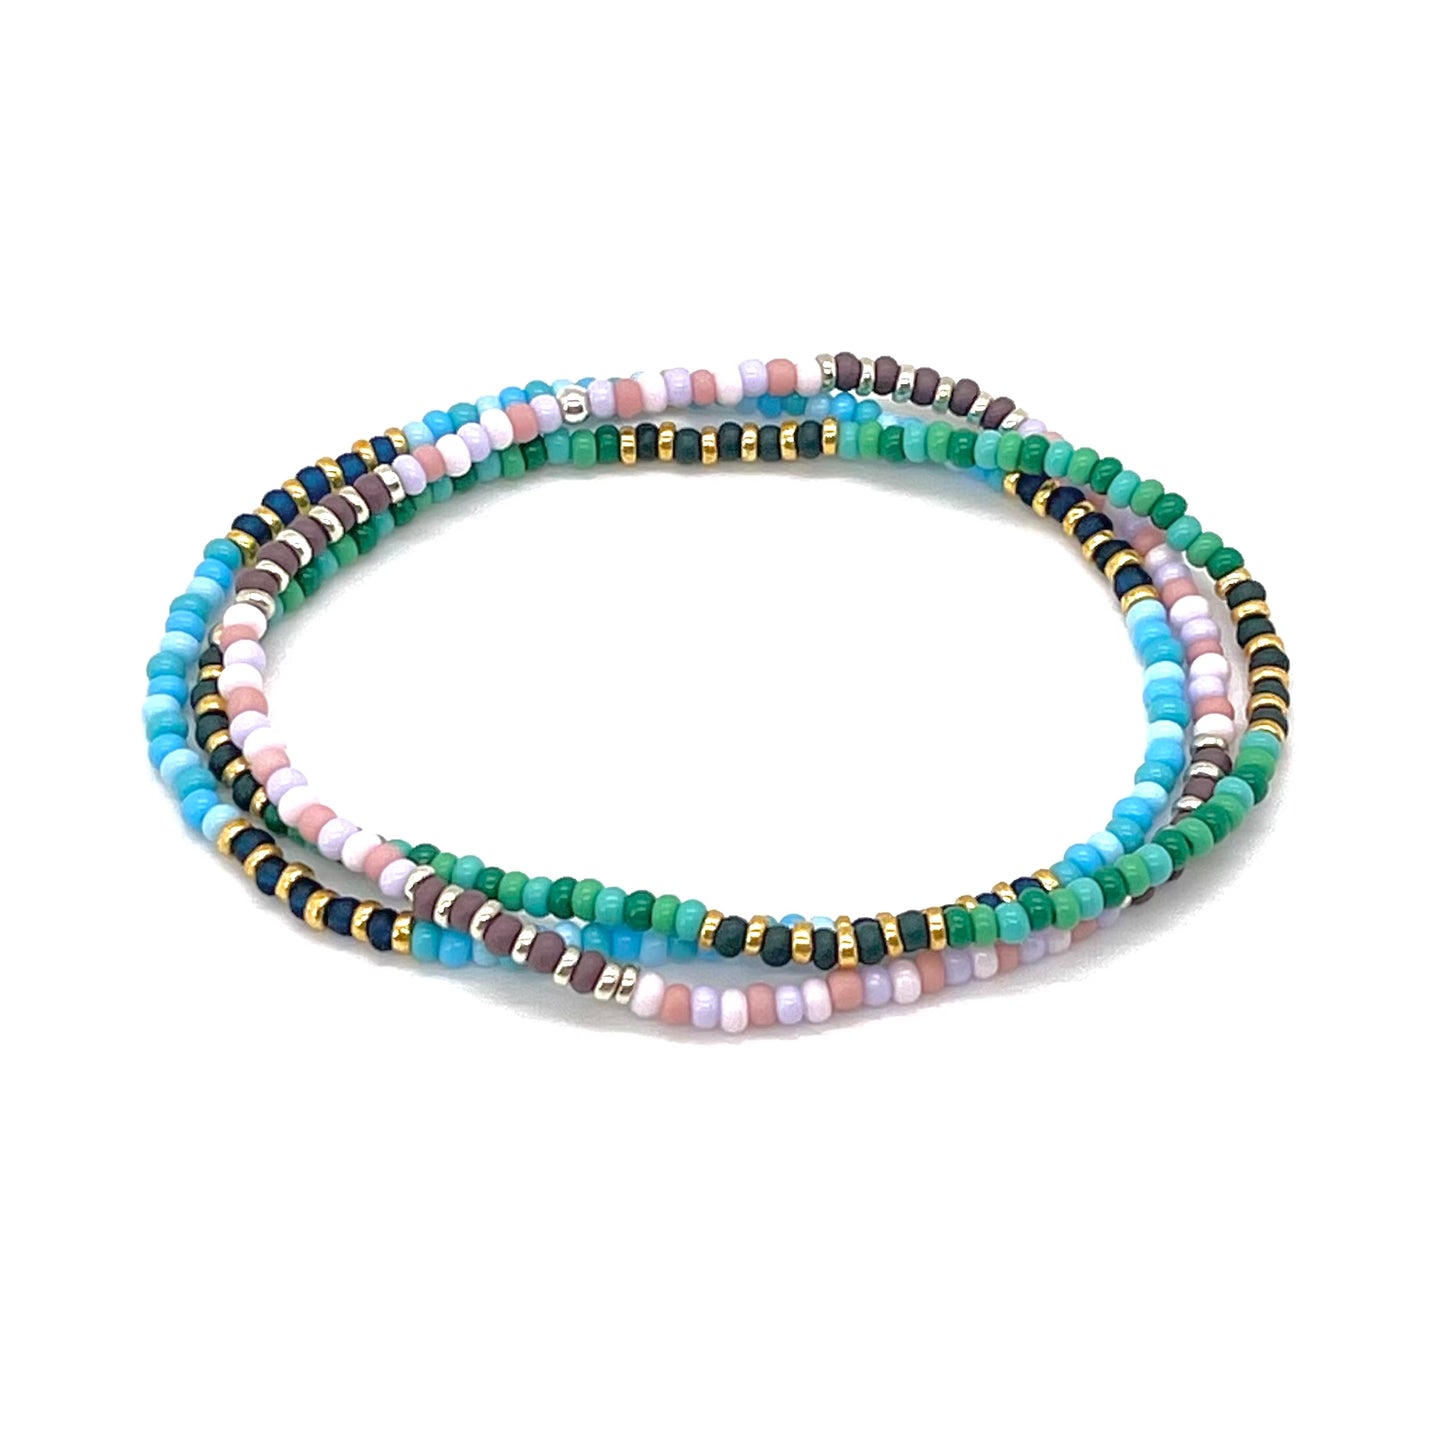 Beaded ankle bracelets with pink, blue and green seed beads and gold and silver tone accent beads on elastic.